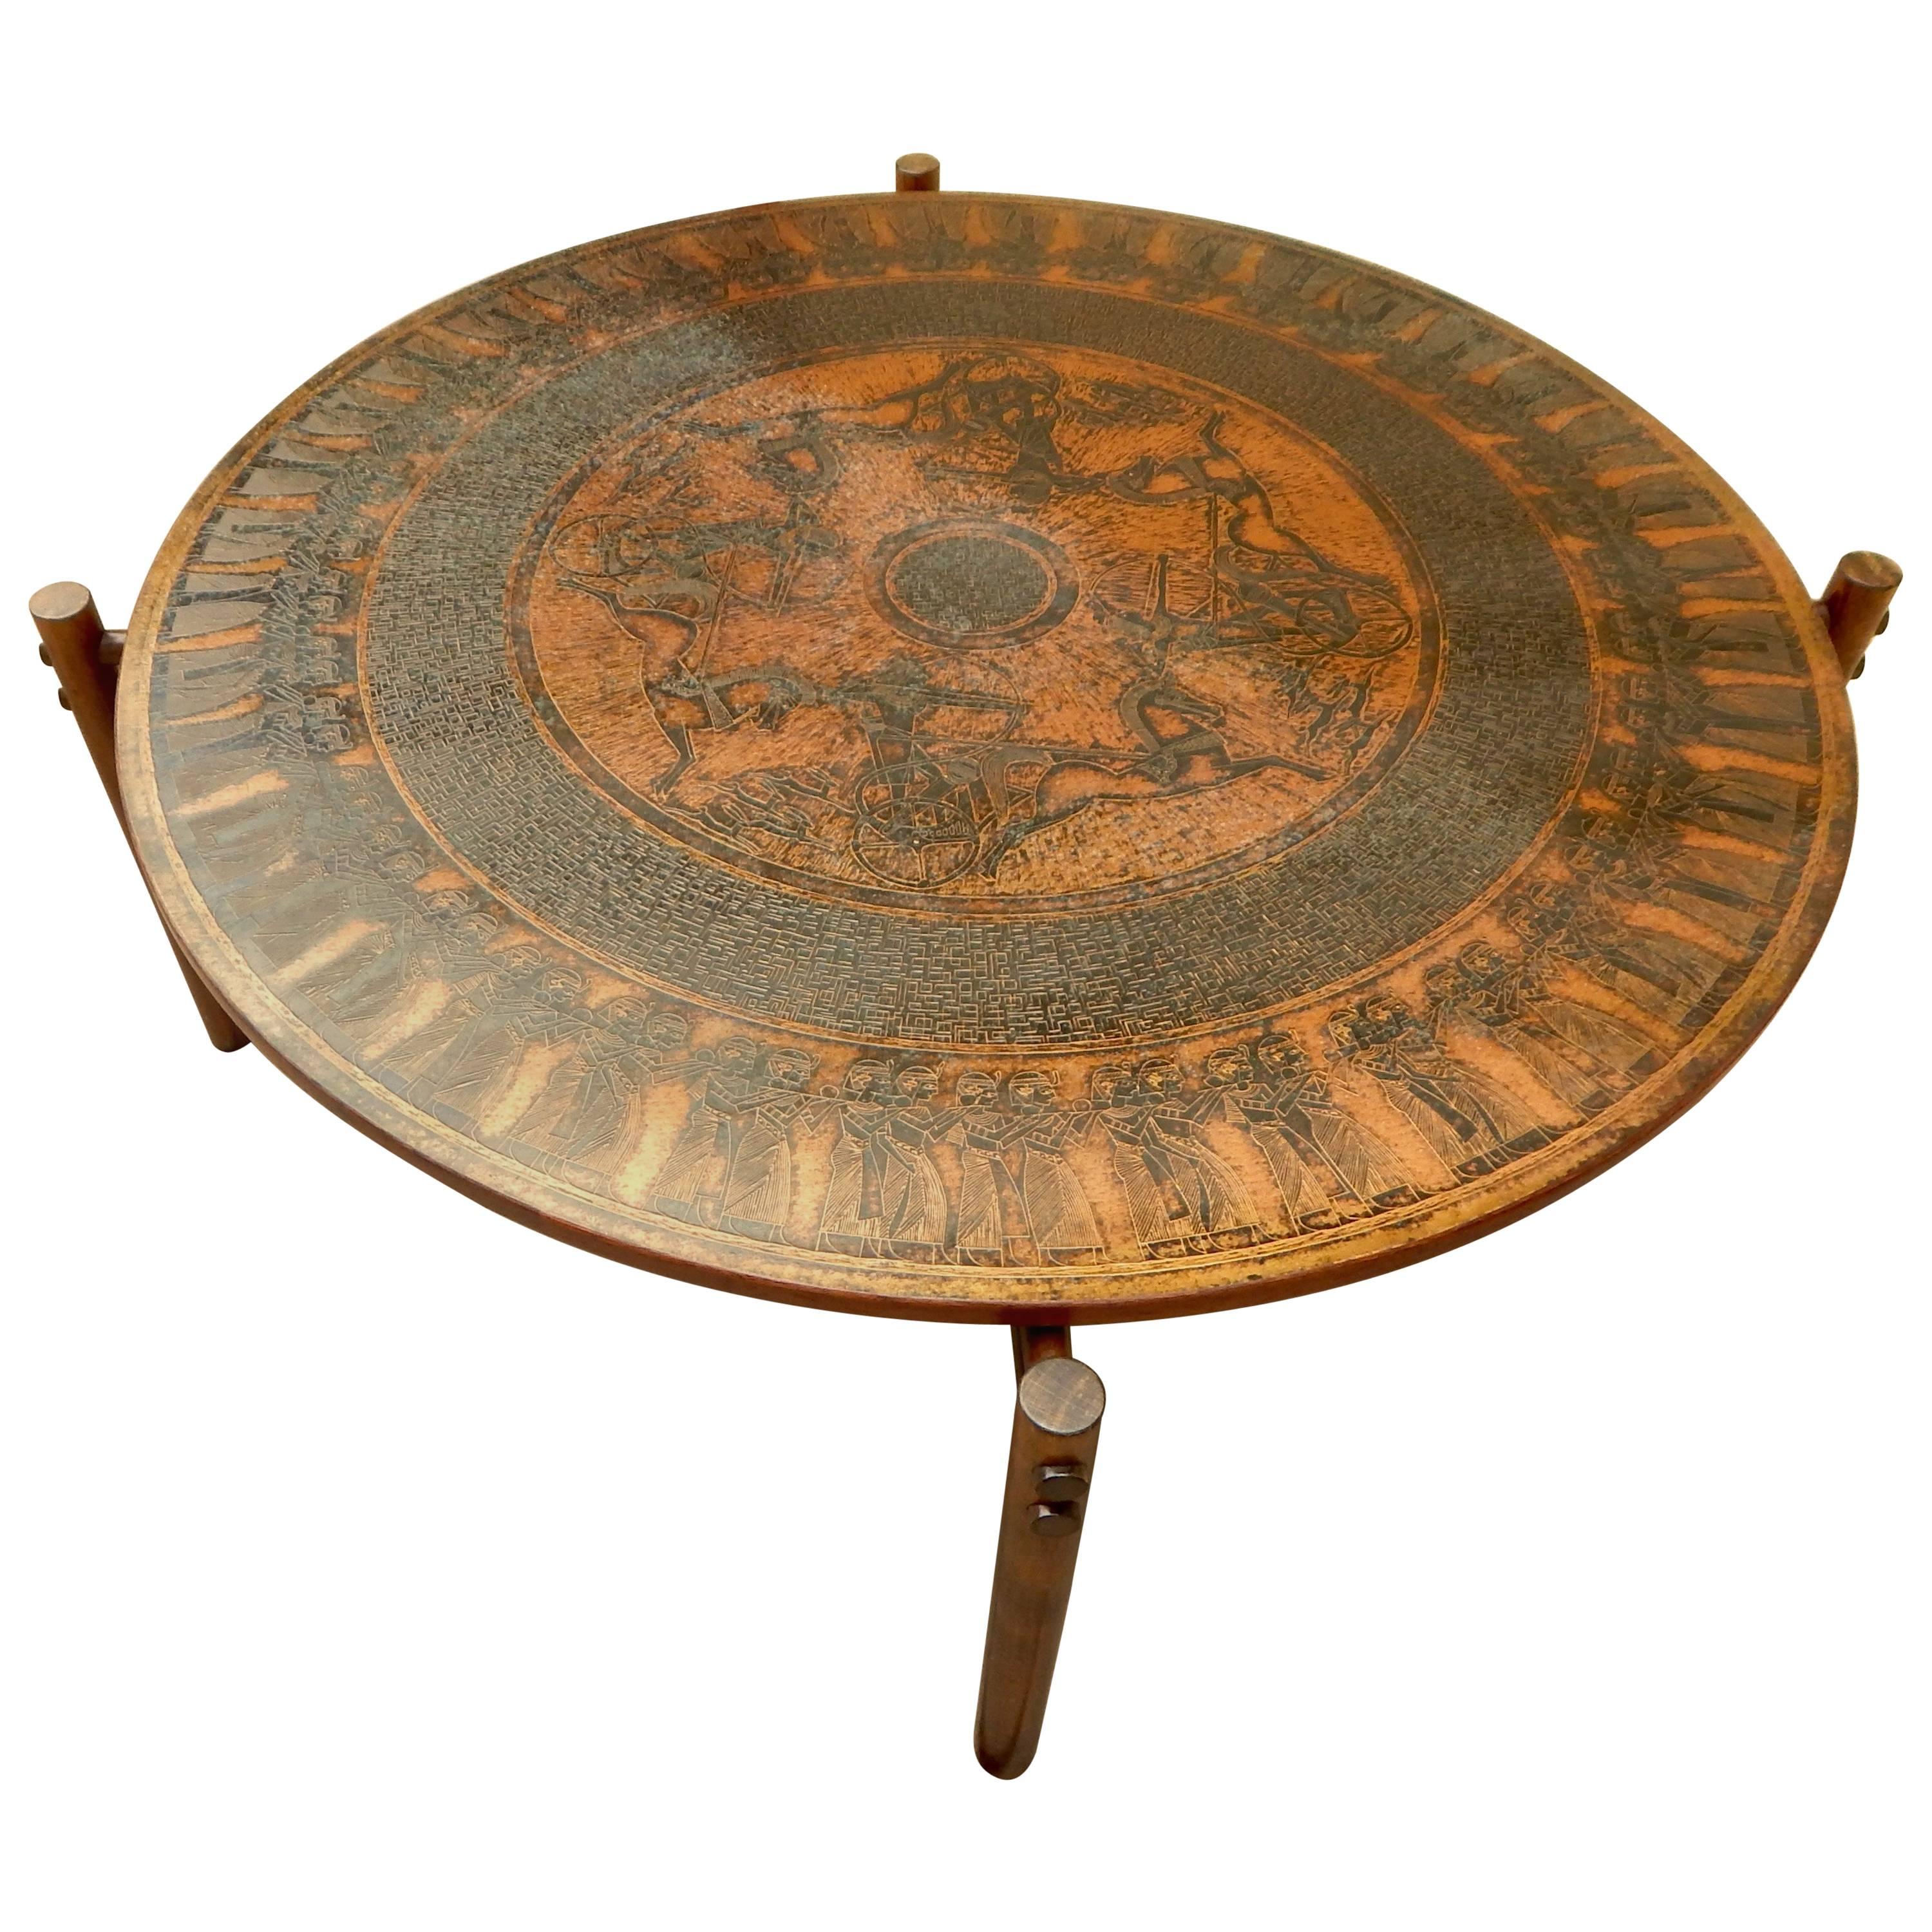 Norwegian coffee table with stamped copper top in neo-Egyptian themes. Crafted by Vad Trevare fabric Norge, circa 1970. Base in solid, stained birch wood. Exposed wood joinery.